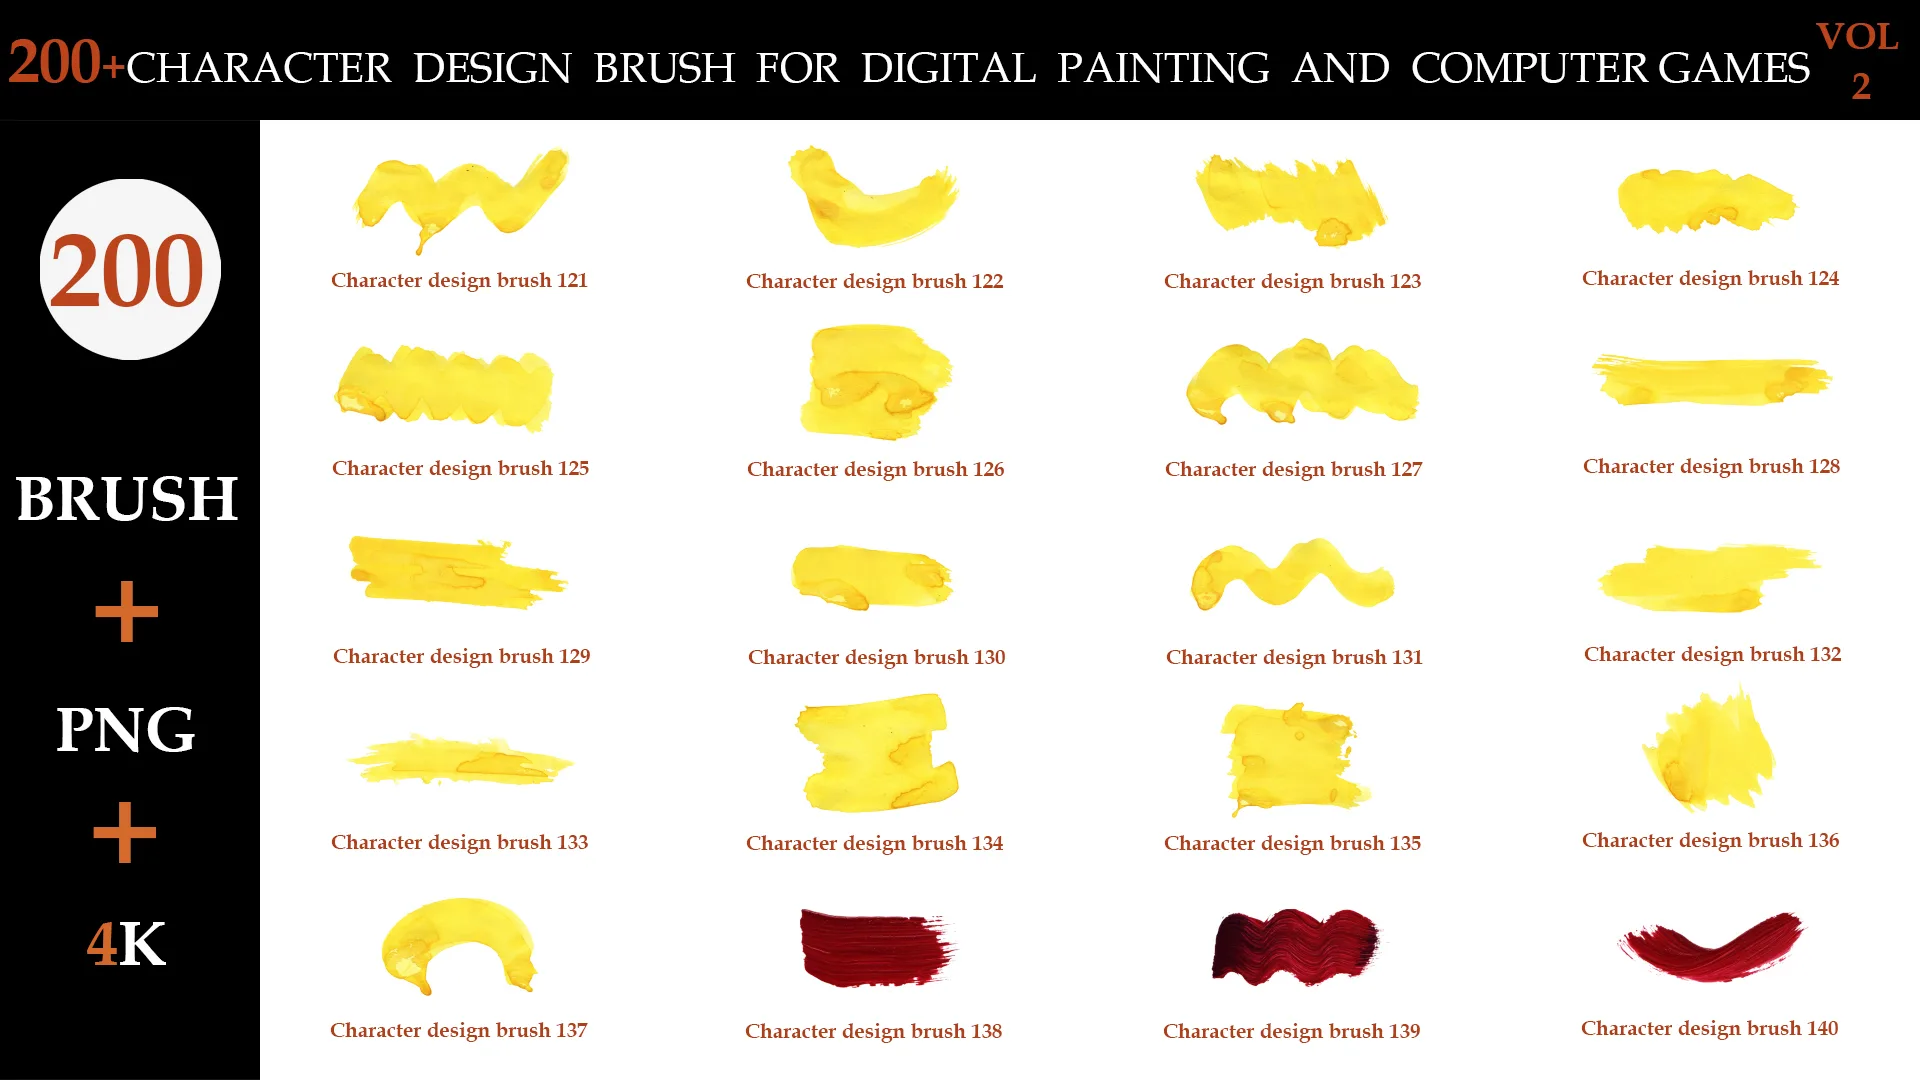 200+CHARACTER DESIGN BRUSH FOR DIGITAL PAINTING AND COMPUTER GAMES VOL:2